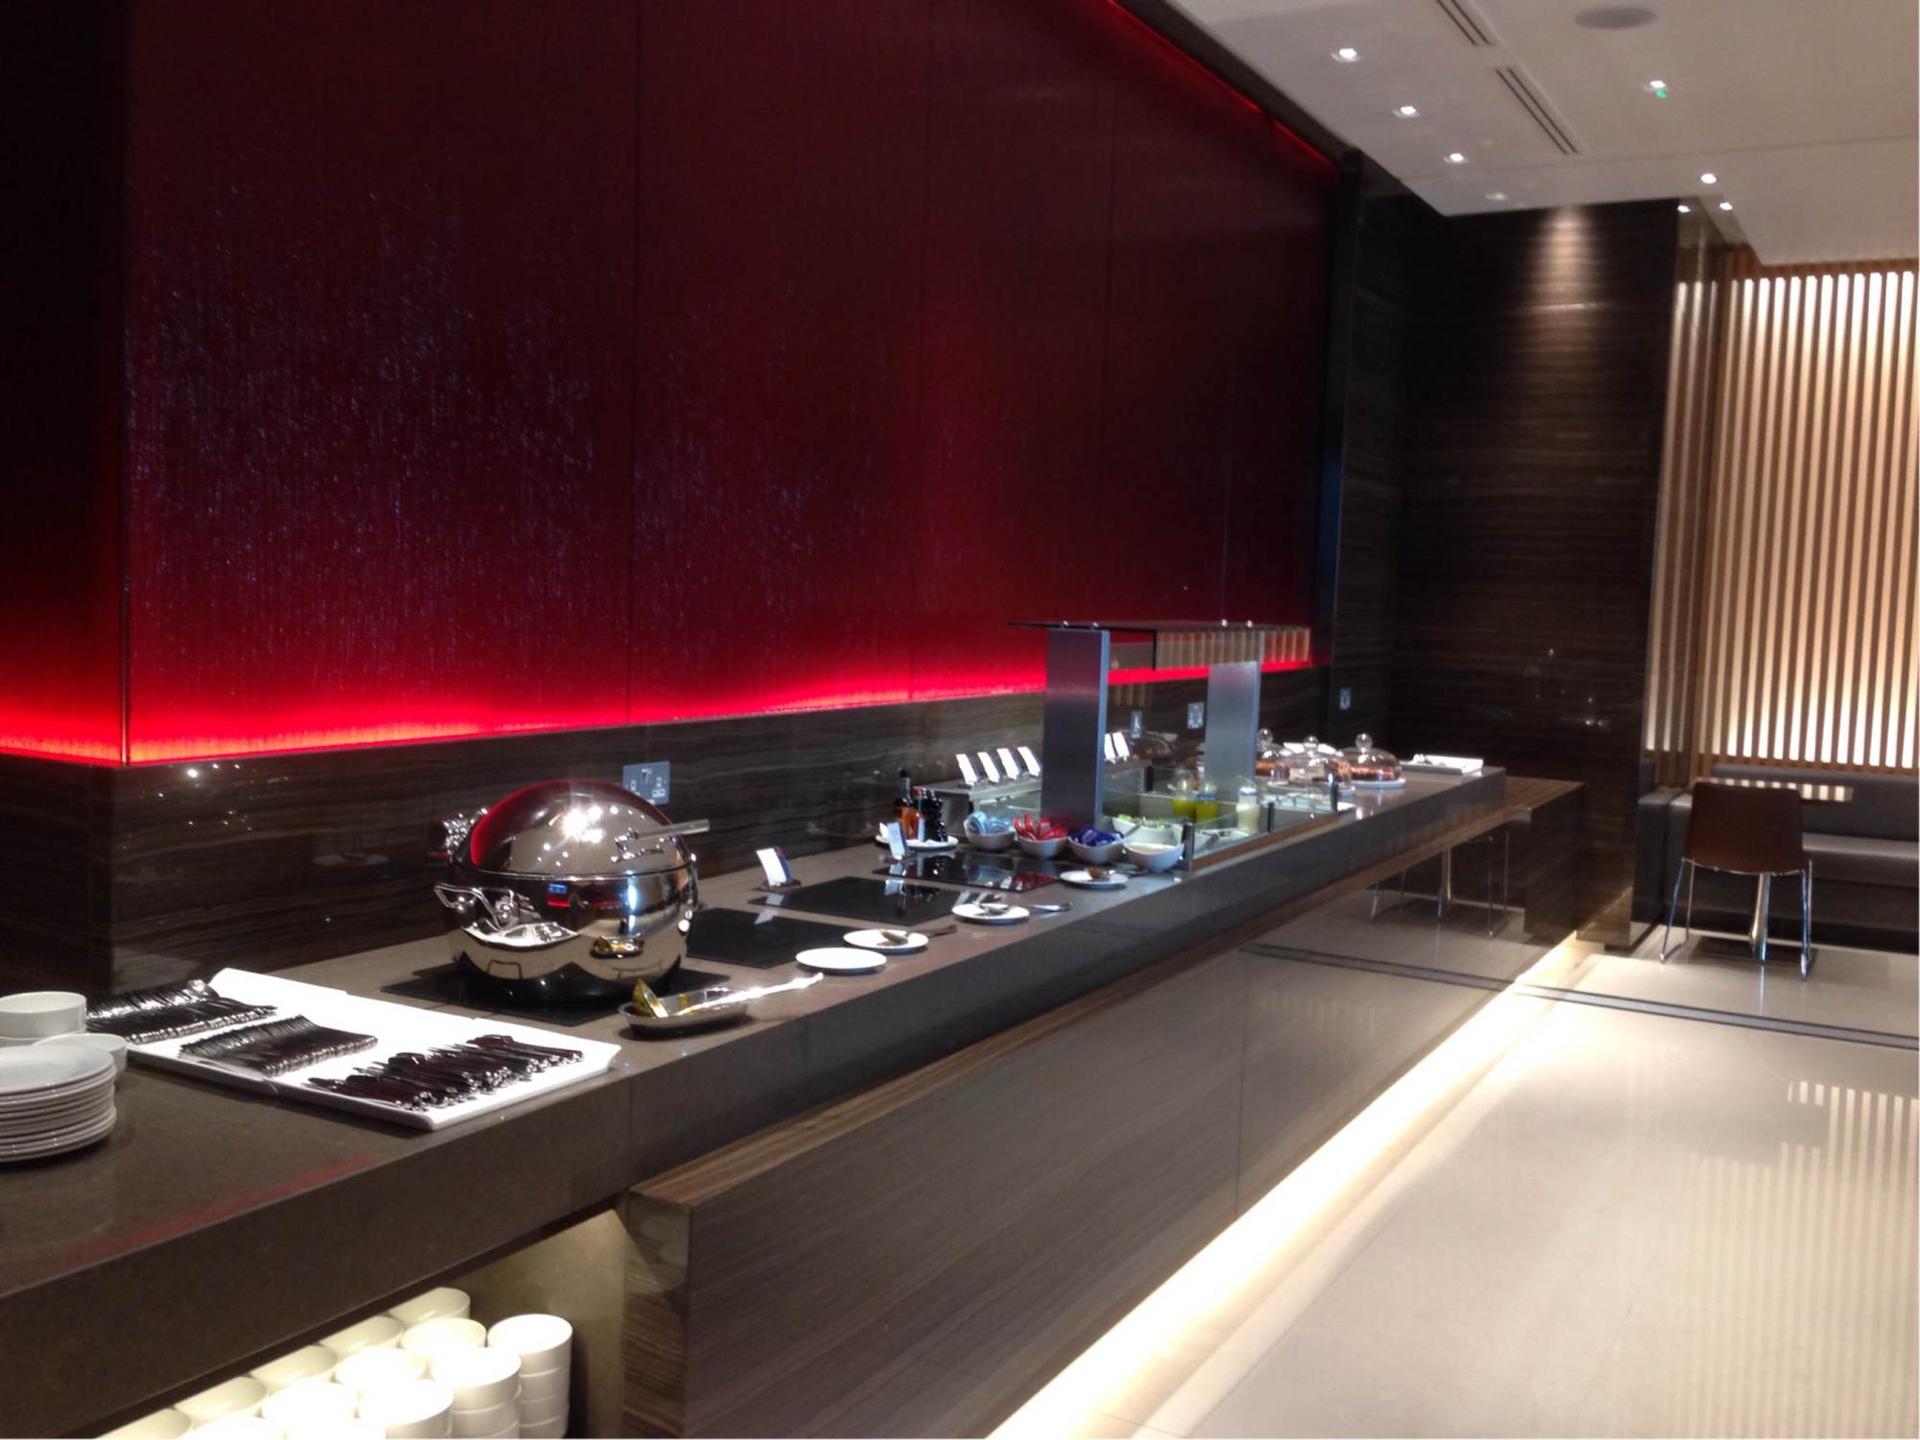 Air Canada Maple Leaf Lounge image 4 of 27